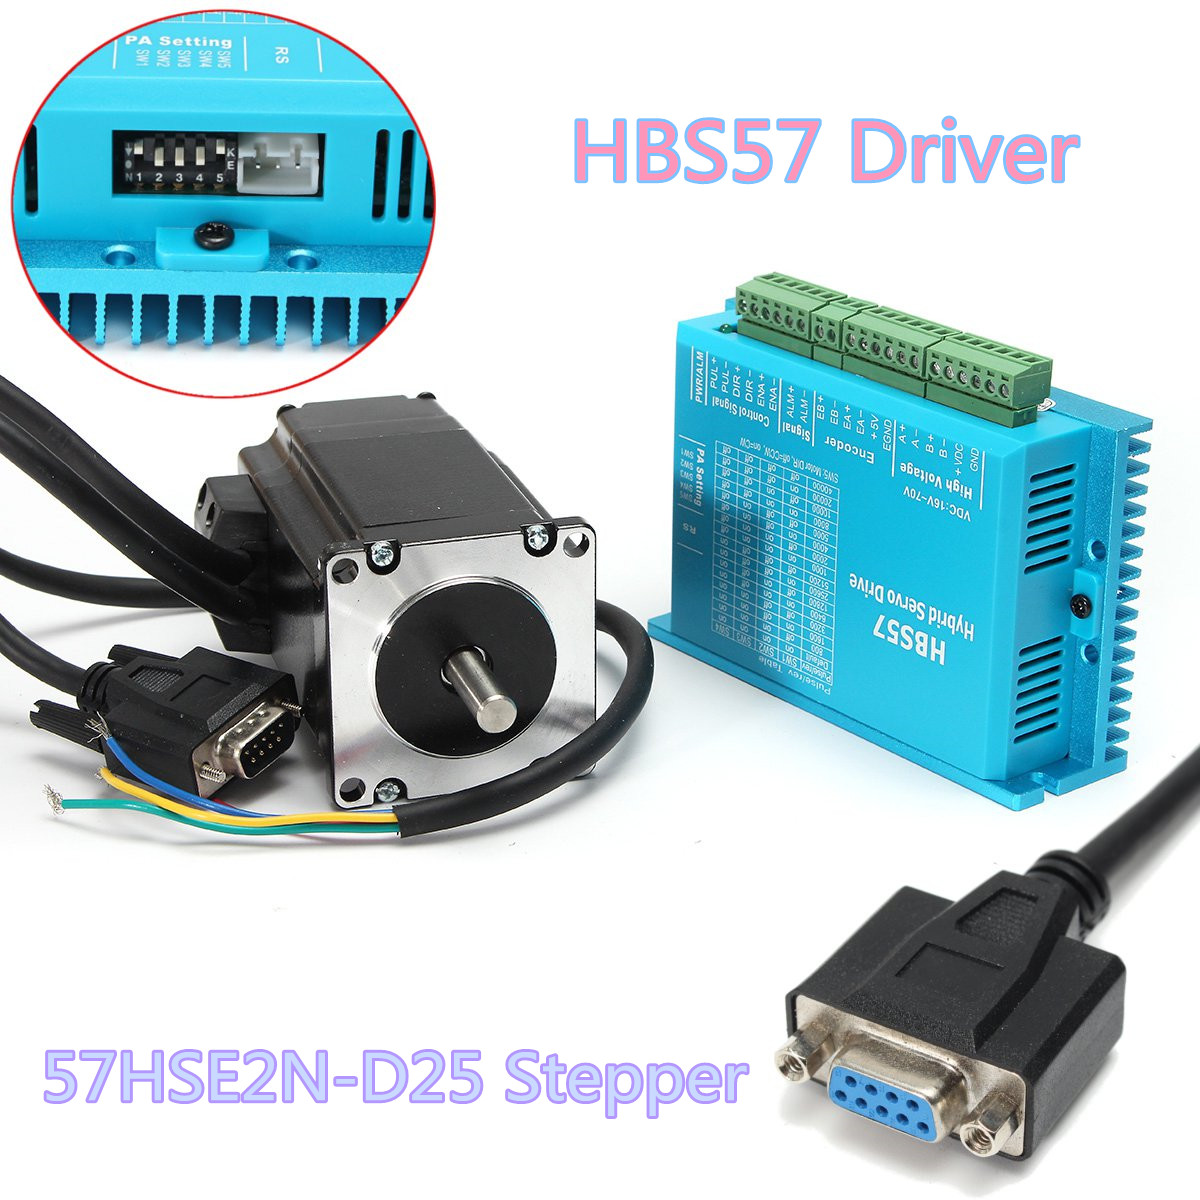 High Speed Closed Loop Stepper Motor + HBS57 Stepper Driver + Coding Cable Kit 15